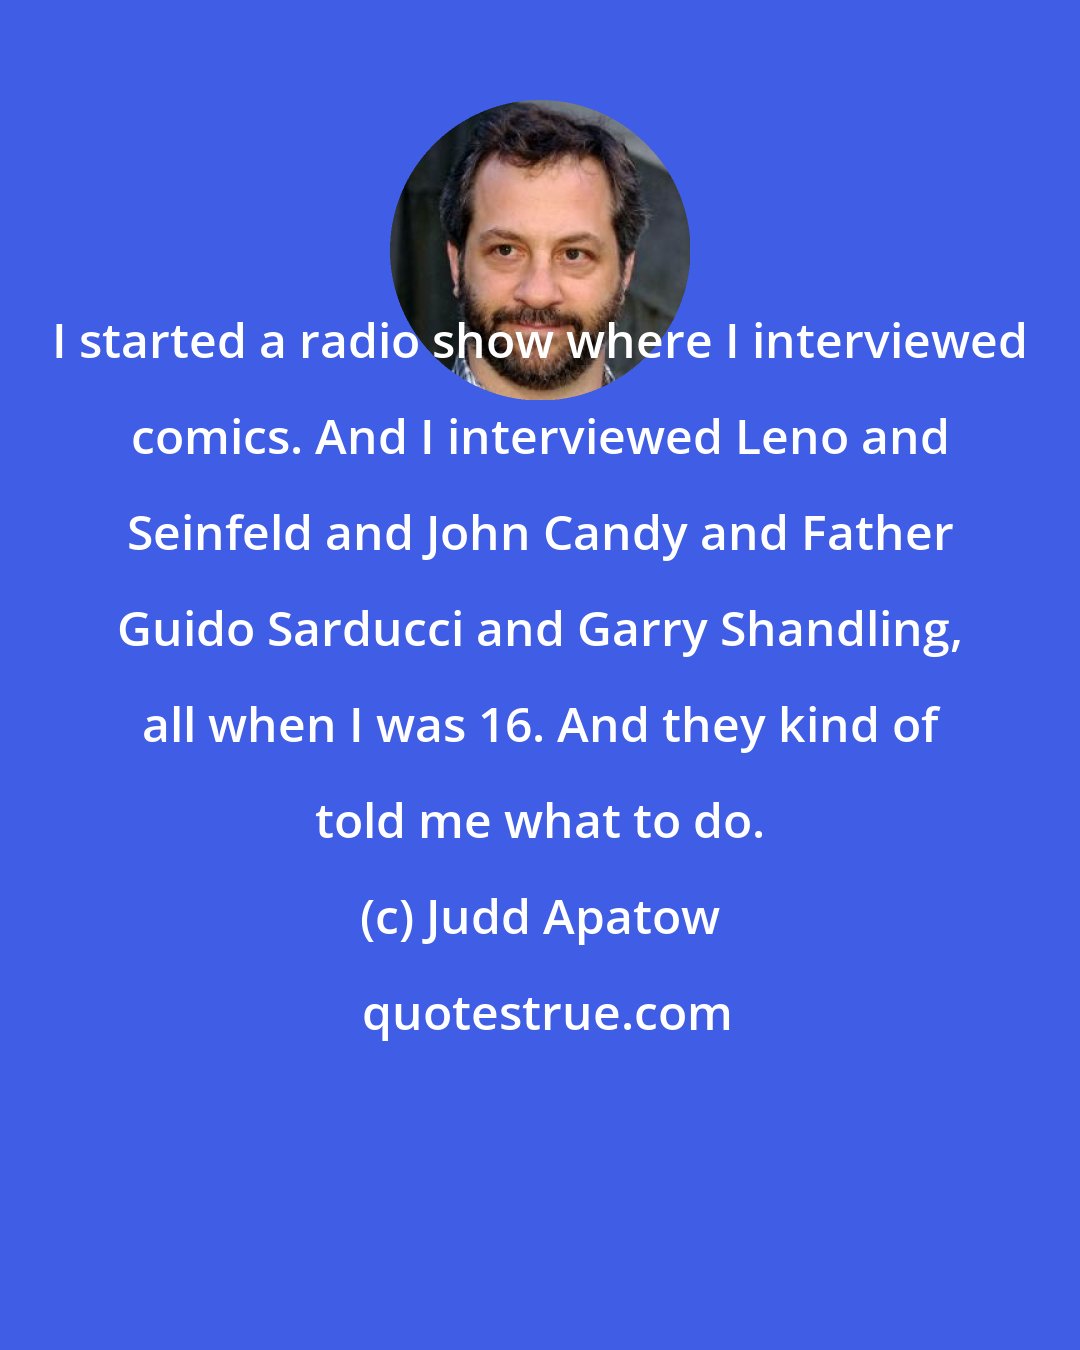 Judd Apatow: I started a radio show where I interviewed comics. And I interviewed Leno and Seinfeld and John Candy and Father Guido Sarducci and Garry Shandling, all when I was 16. And they kind of told me what to do.